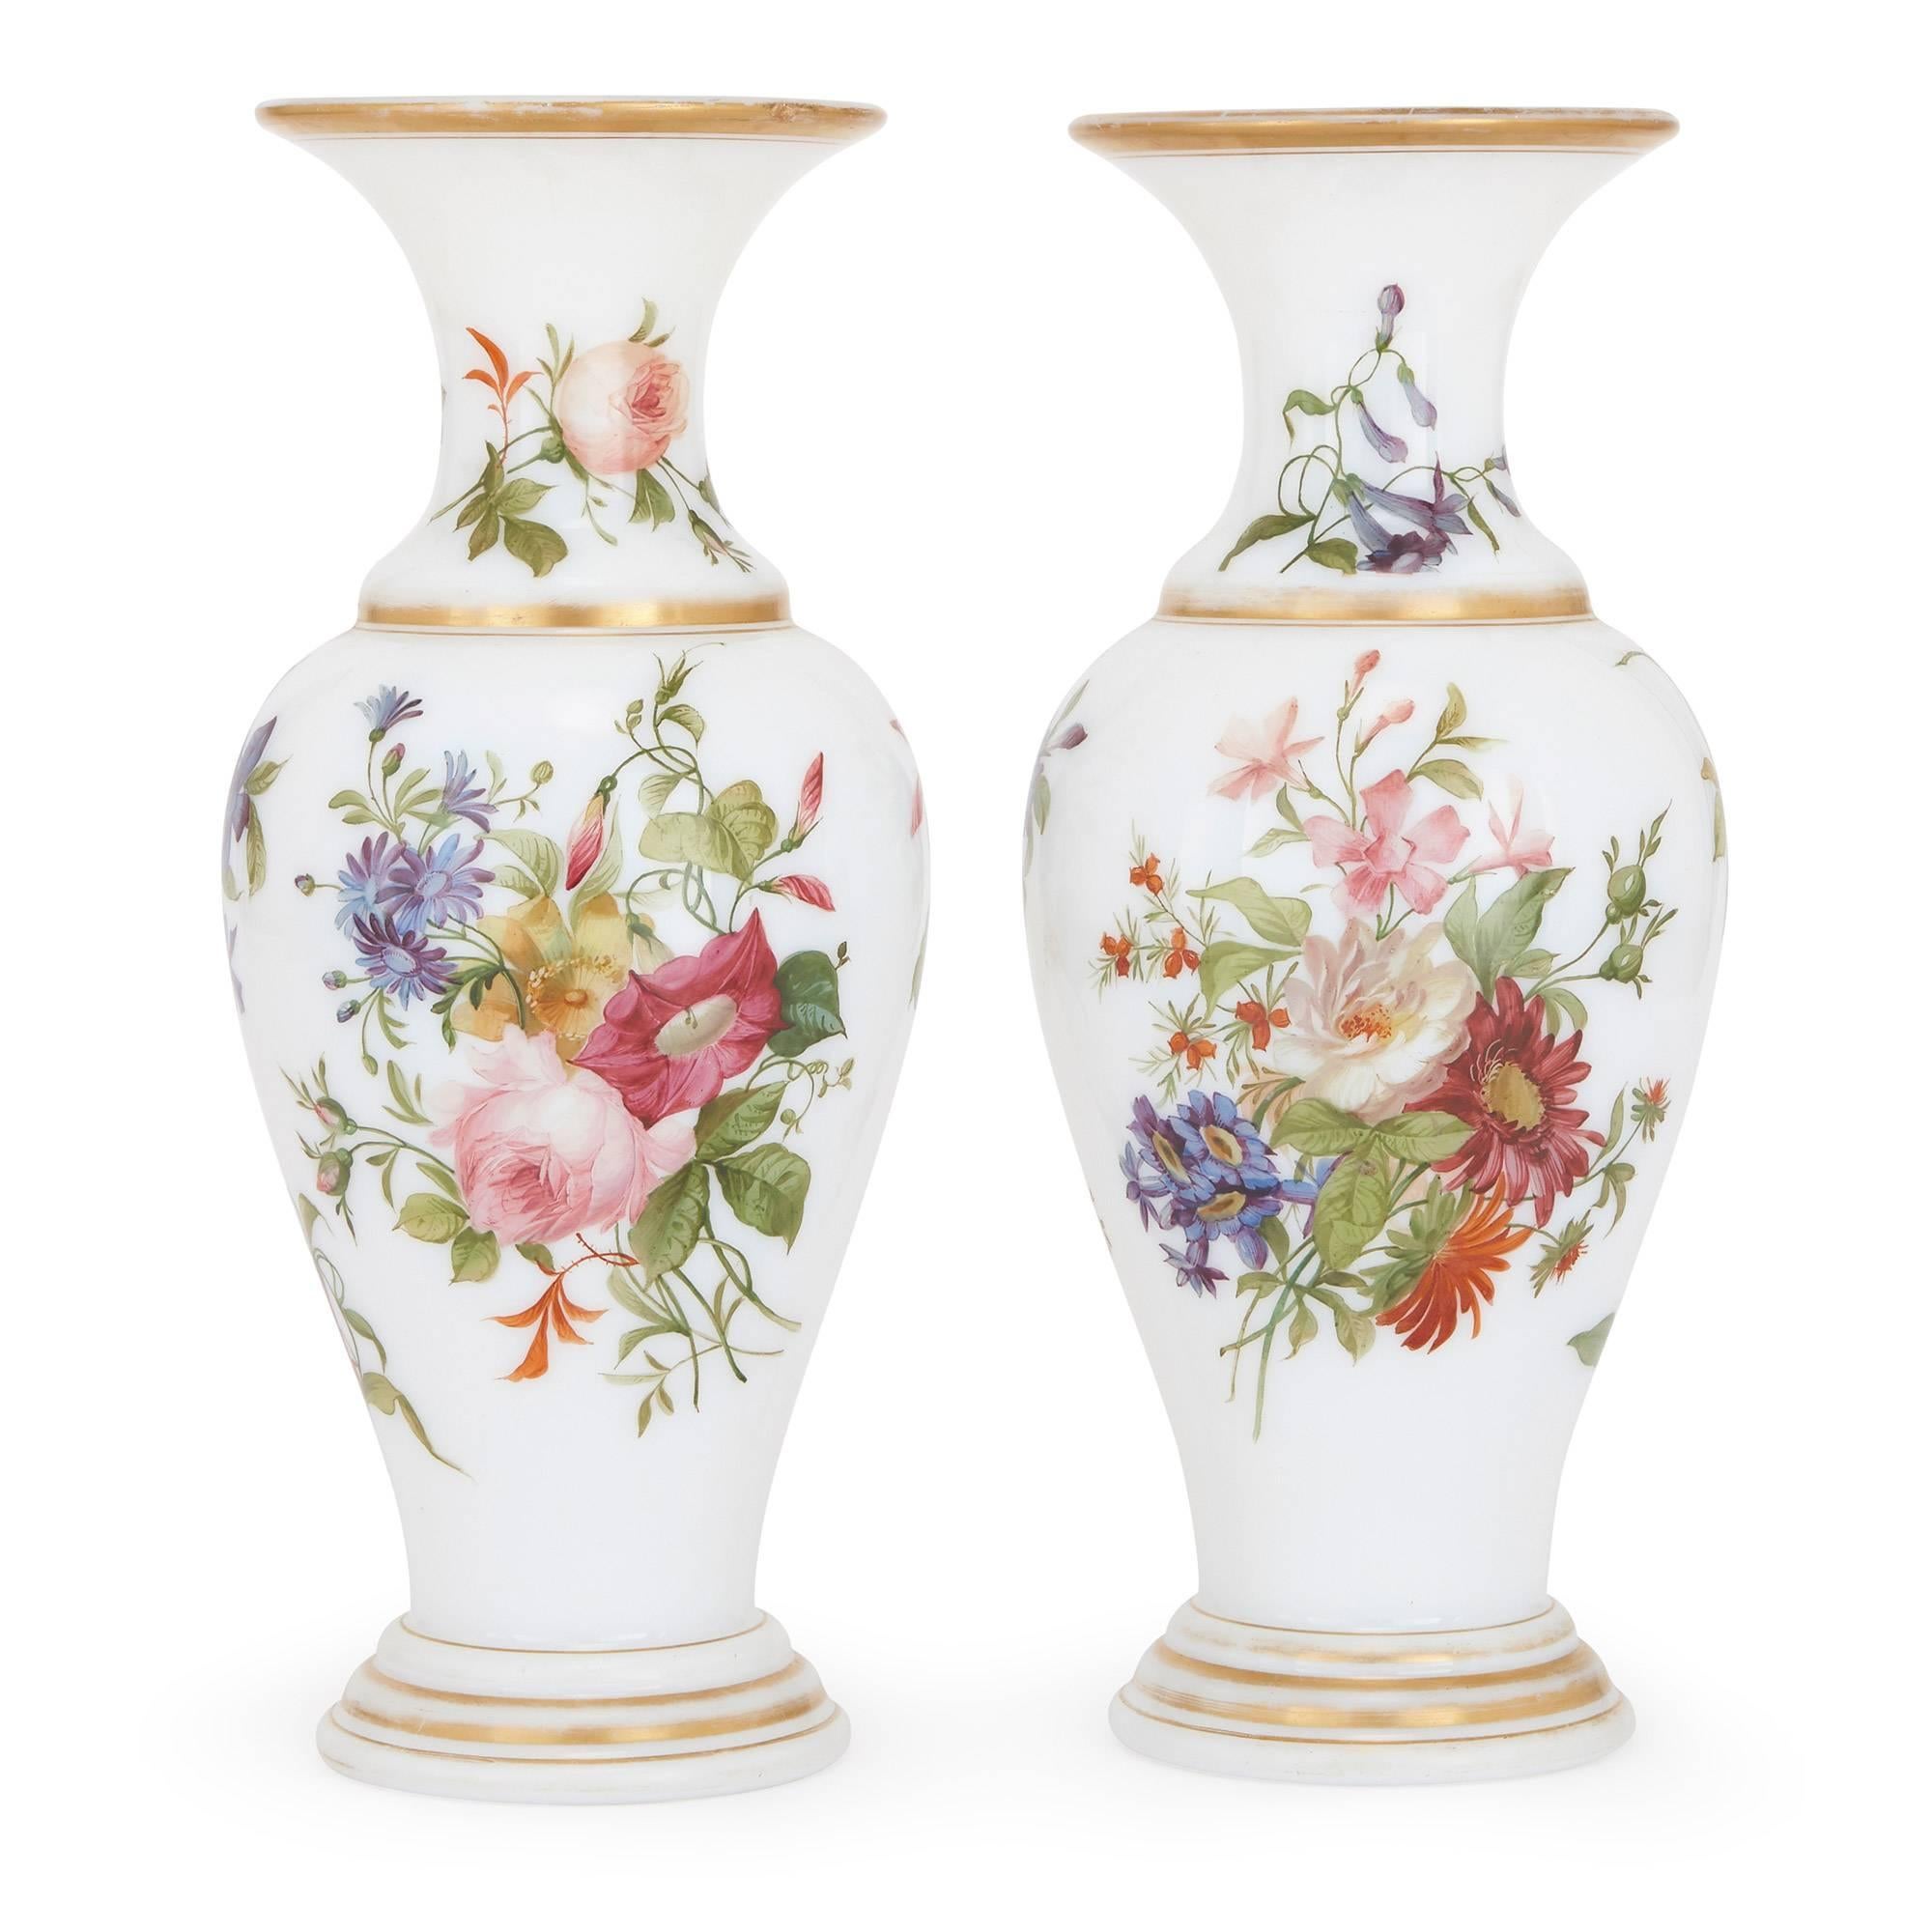 These exquisite 19th century French vases have been attributed to the famed French glass manufacturer Baccarat, the maker of some of the finest pieces of glassware in history. The vases take an ovoid shape, and their bodies are crafted from smooth